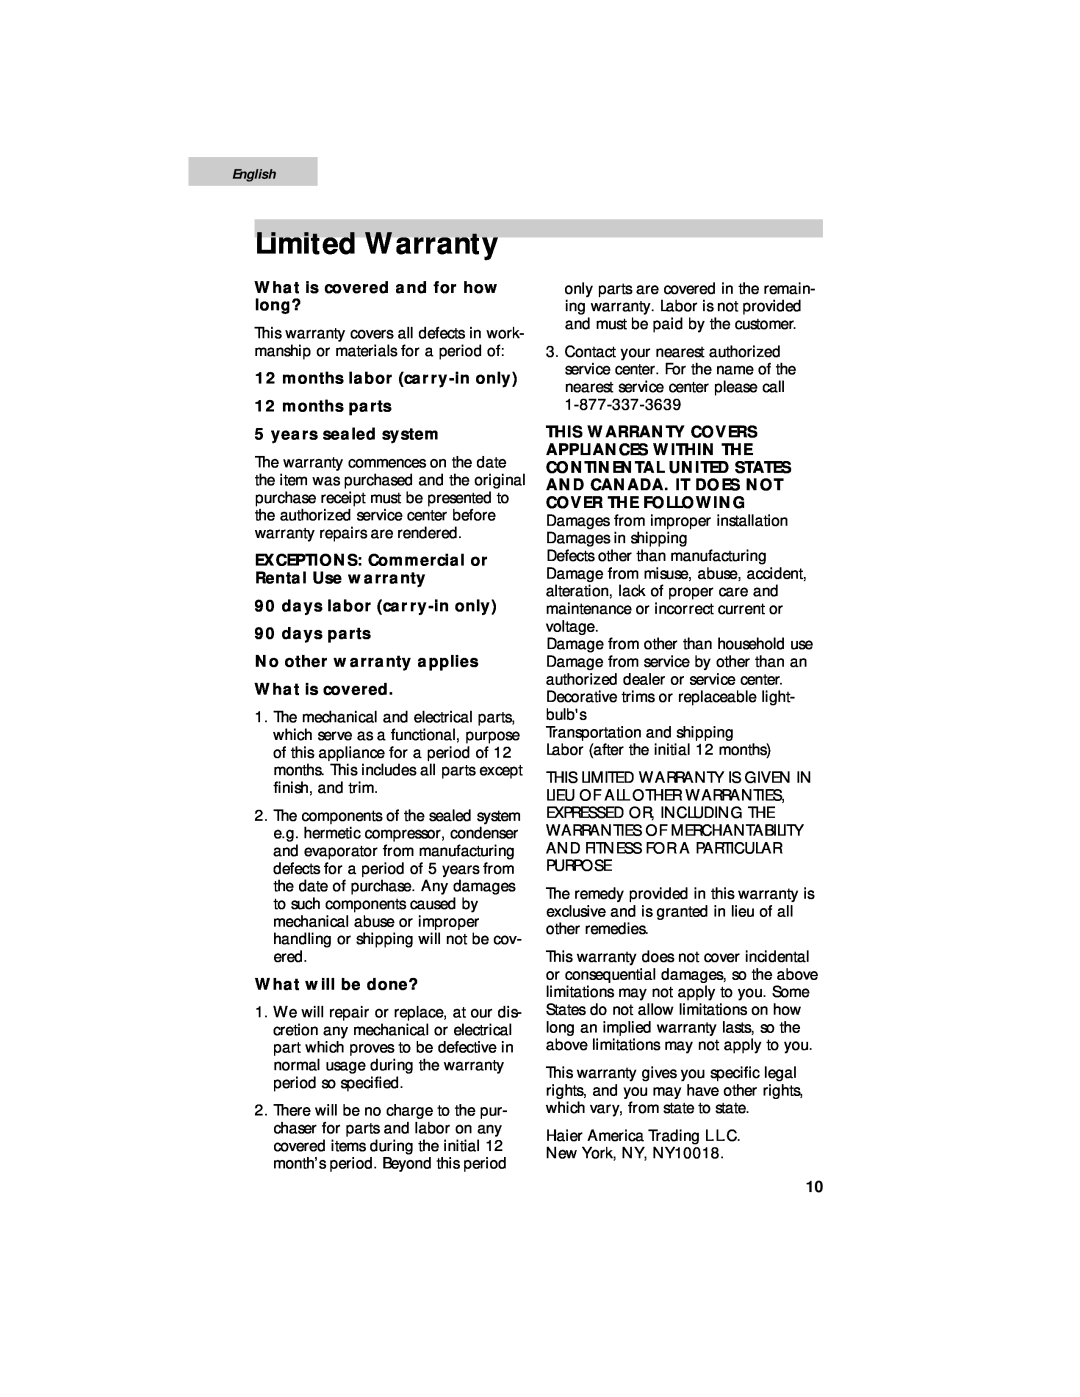 Haier ESR042PBB Limited Warranty, English, What is covered and for how long?, EXCEPTIONS Commercial or Rental Use warranty 